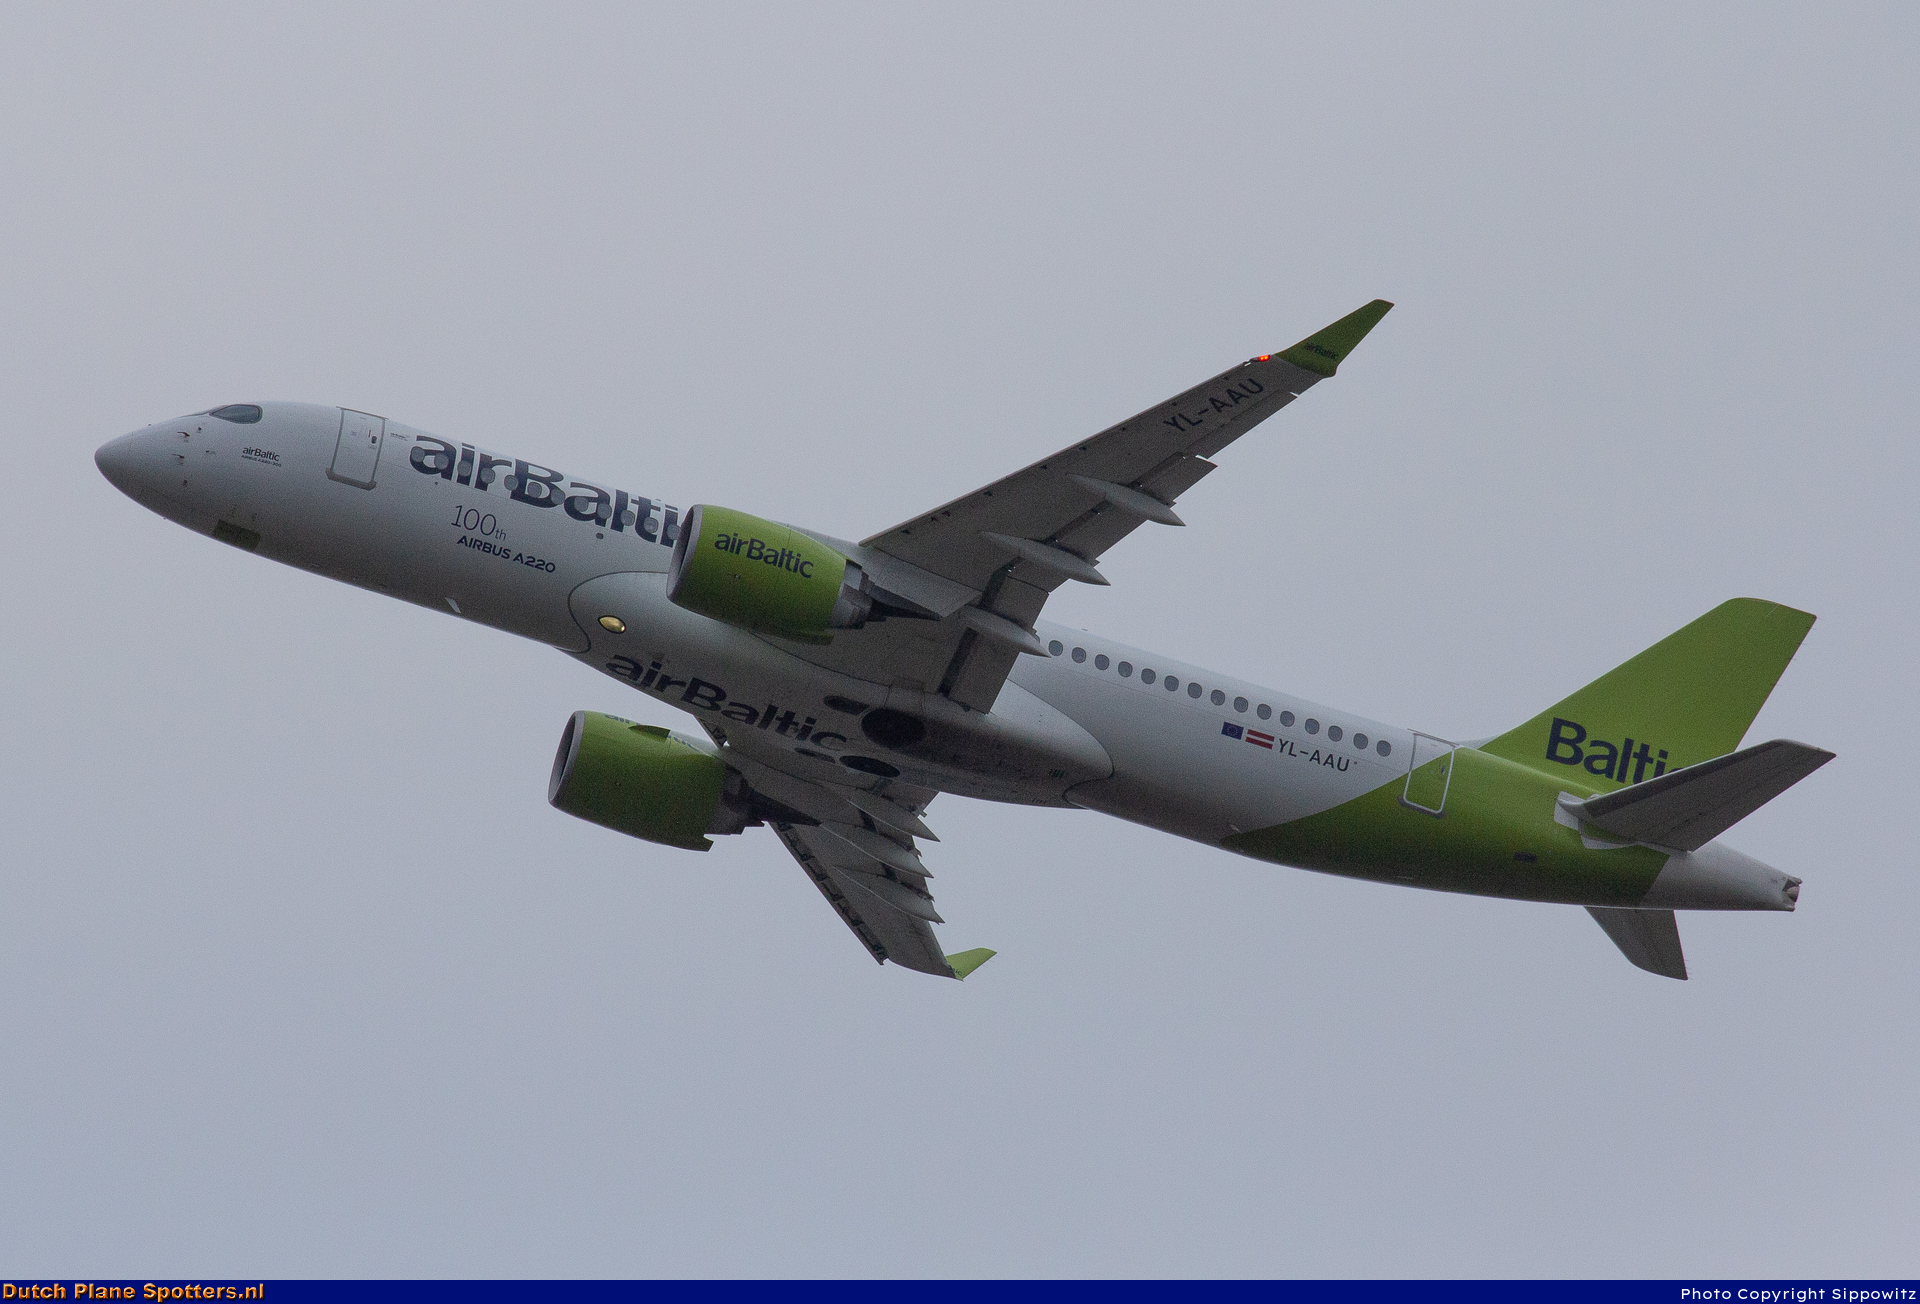 YL-AAU Airbus A220-300 Air Baltic by Sippowitz